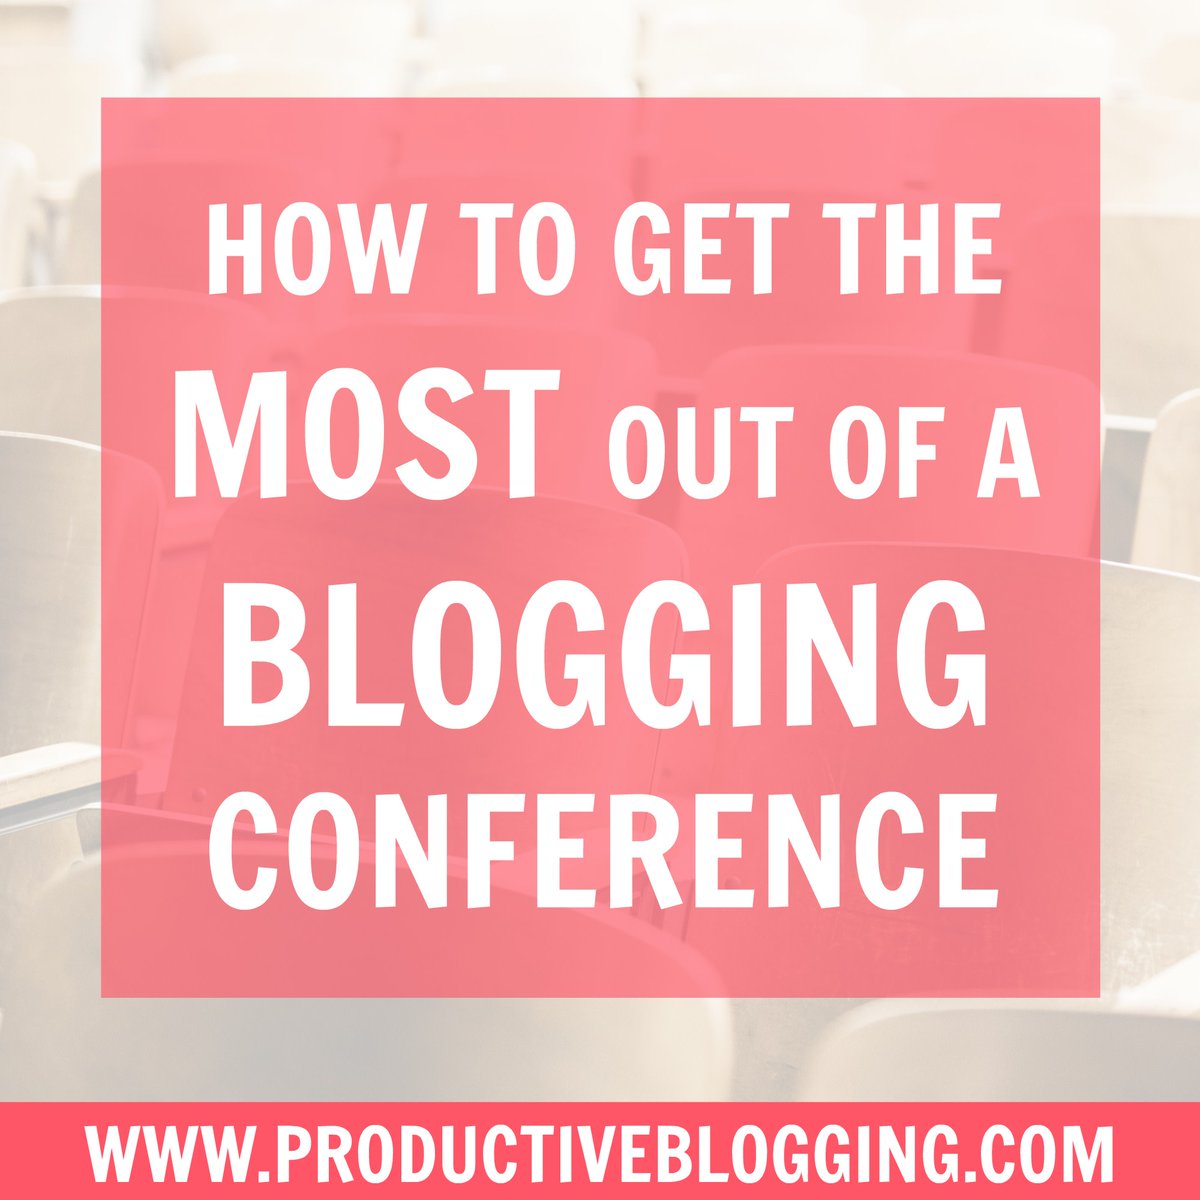 Blogging conferences are a great way to fast track your blogging skills, meet other bloggers and network with brands… 

But they can also be daunting, overwhelming and expensive!

Here’s how to get the most out of a #bloggingconference >>> bit.ly/2njAVW3

#bloggingtips